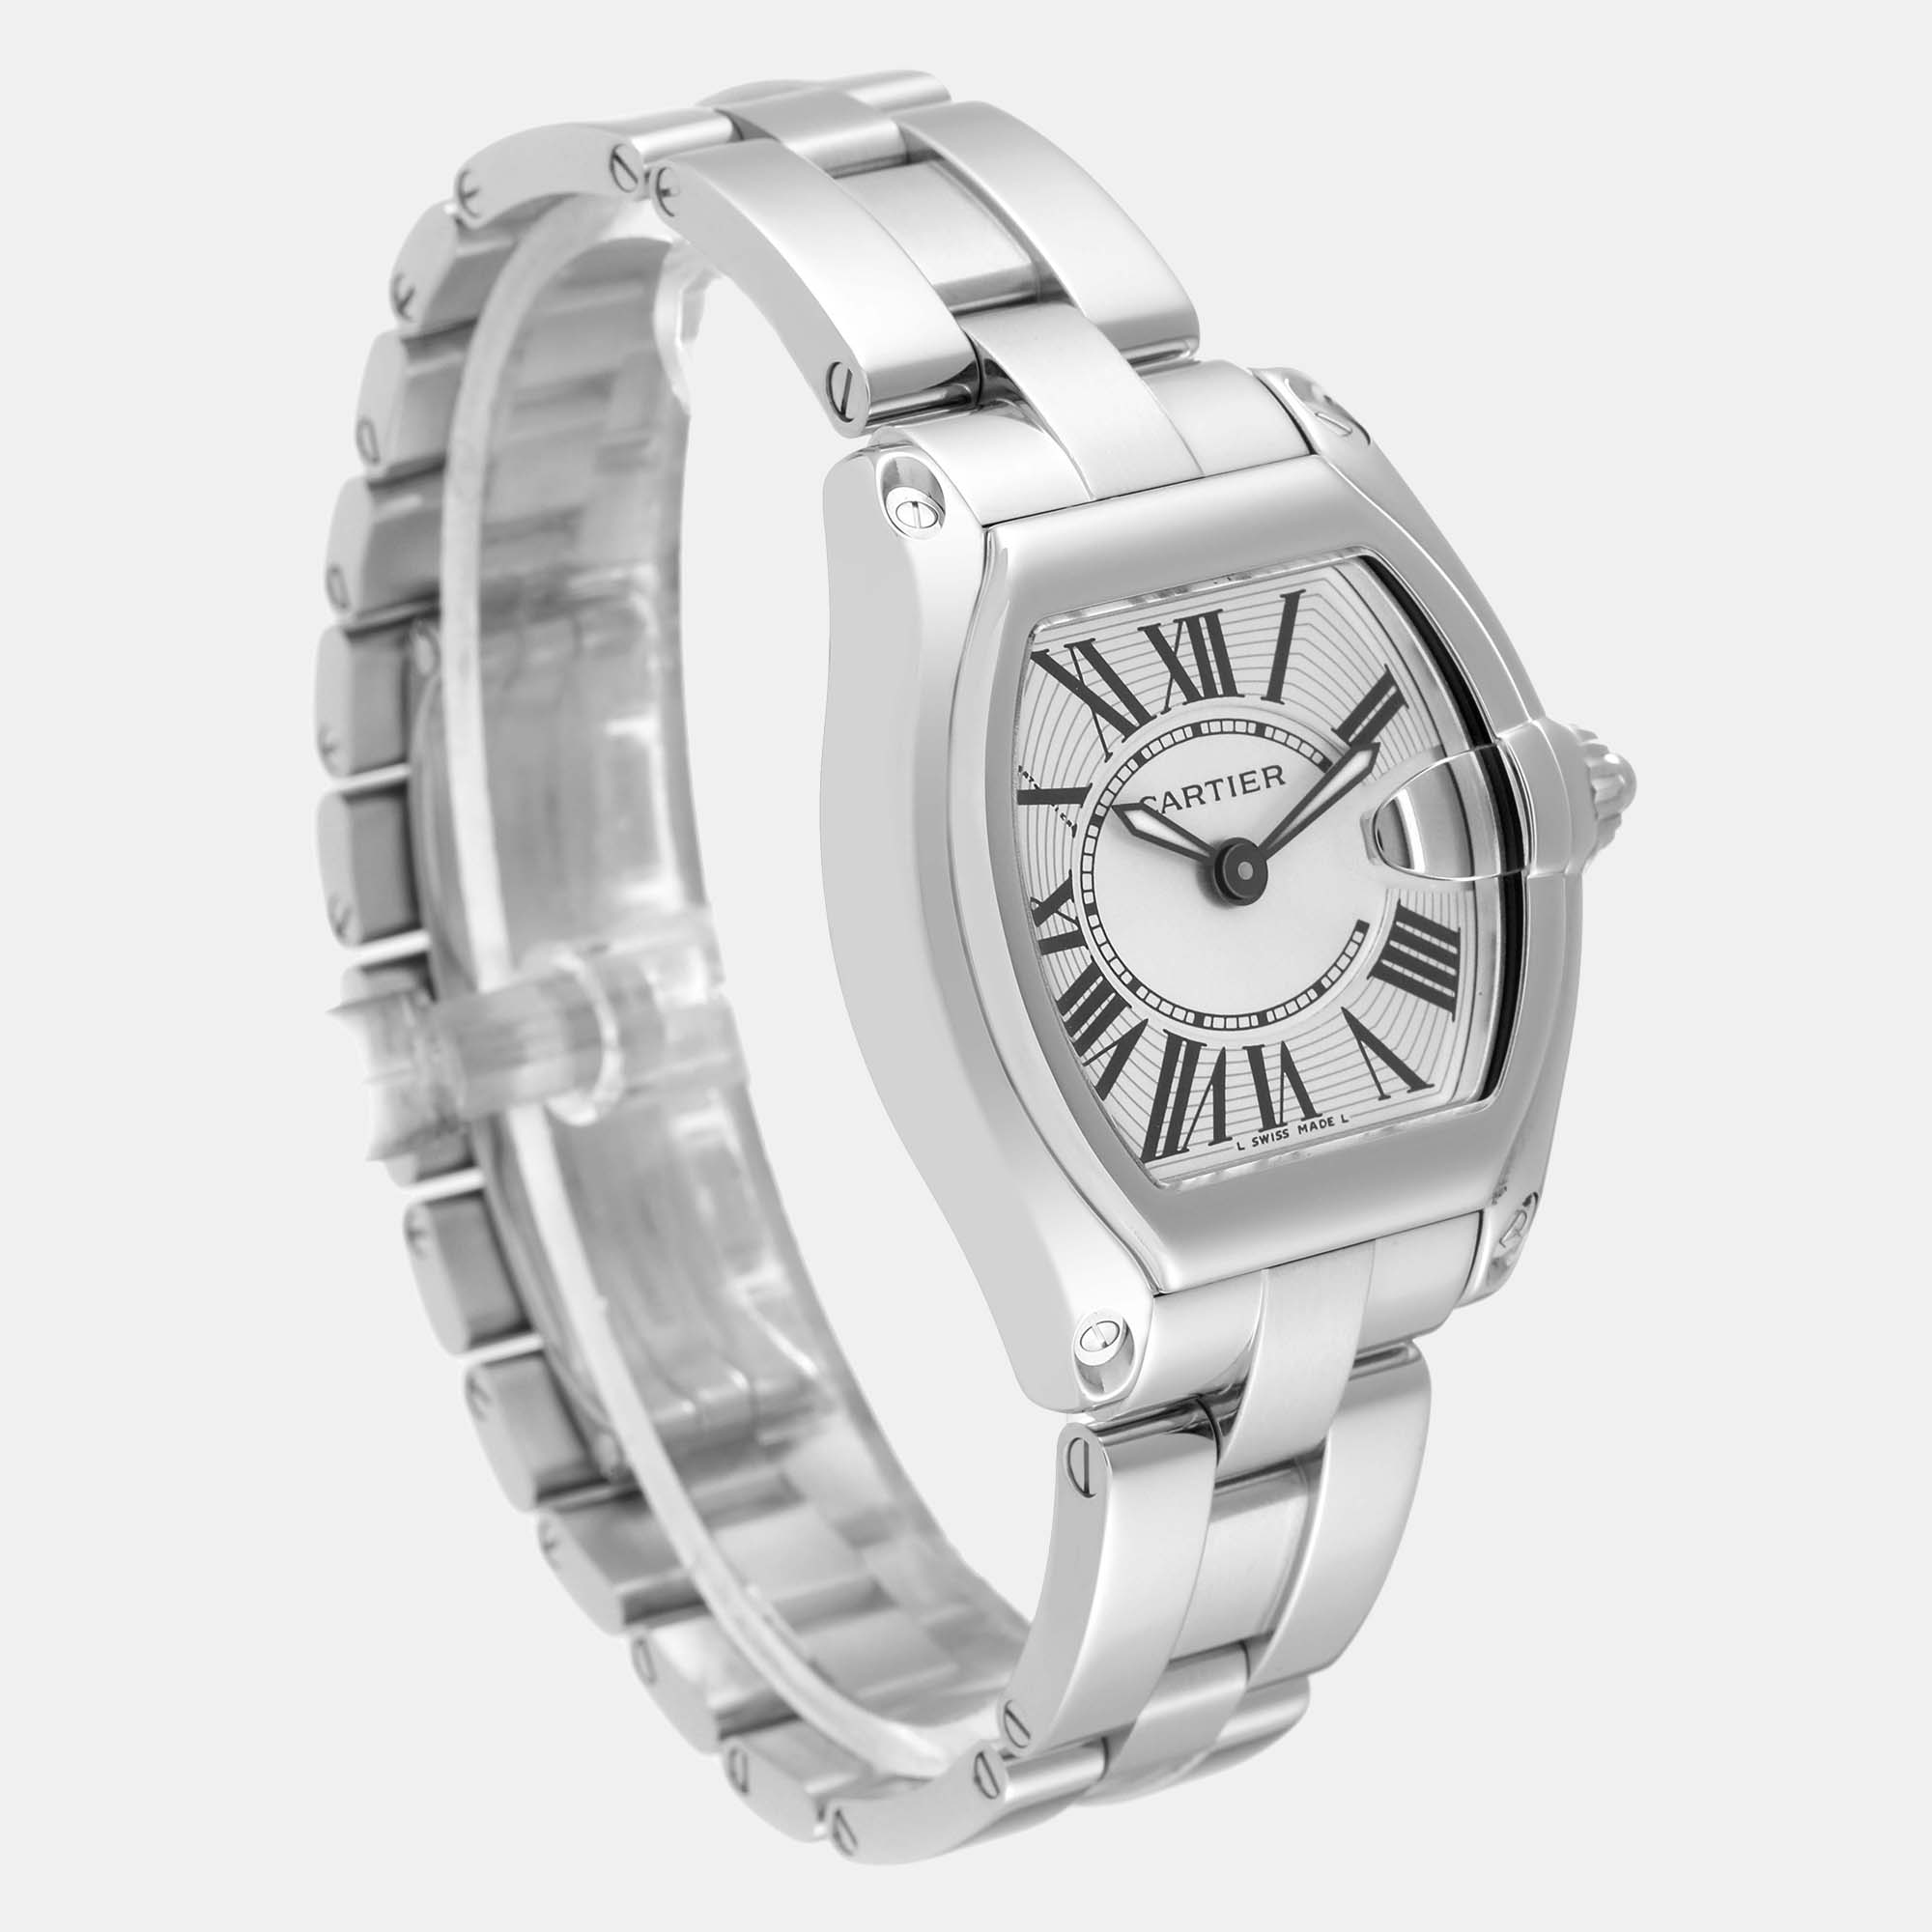 Cartier Roadster Small Silver Dial Steel Ladies Watch W62016V3 36 Mm X 30 Mm